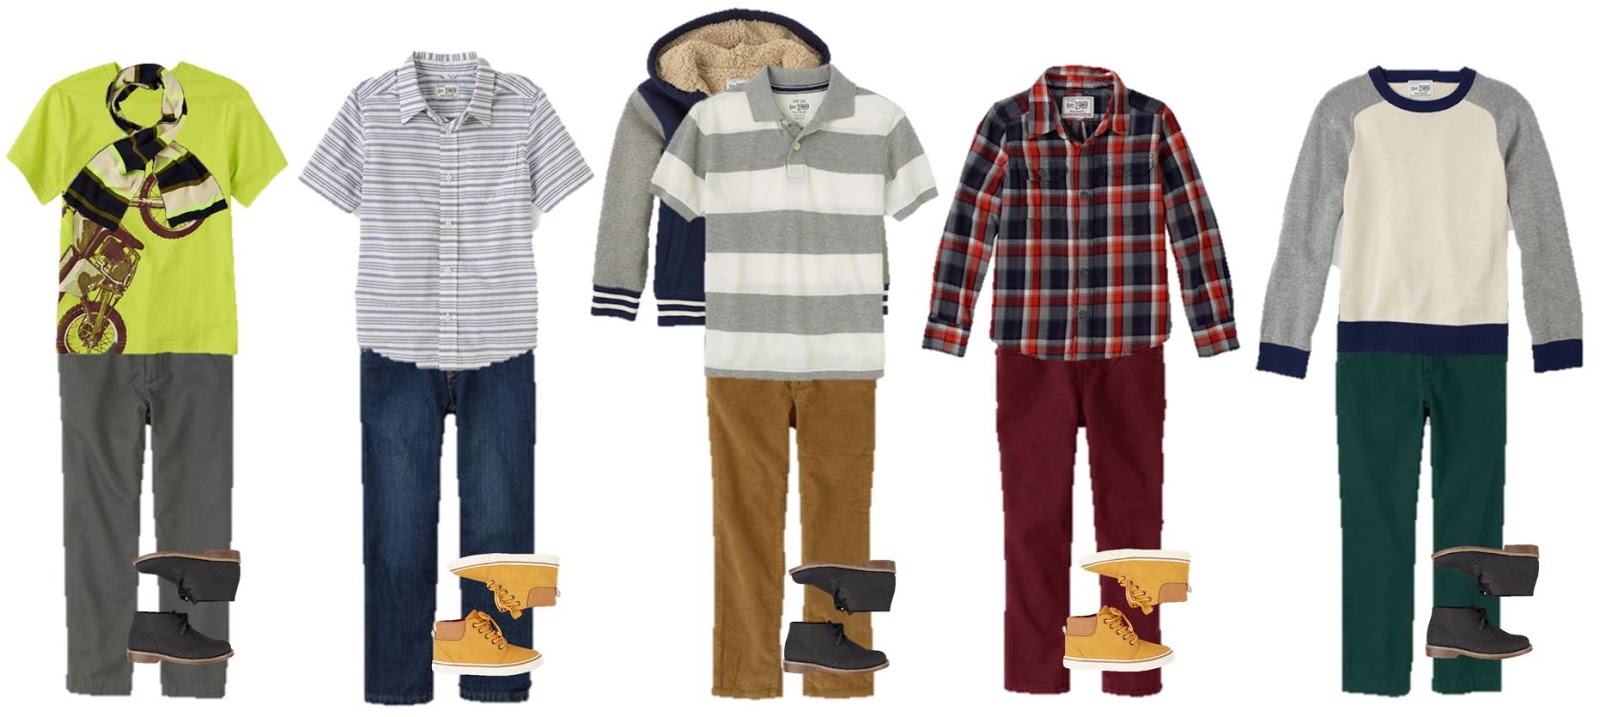 Life With 4 Boys: Mix and Match Fall Wardrobe for Boys #Fashion